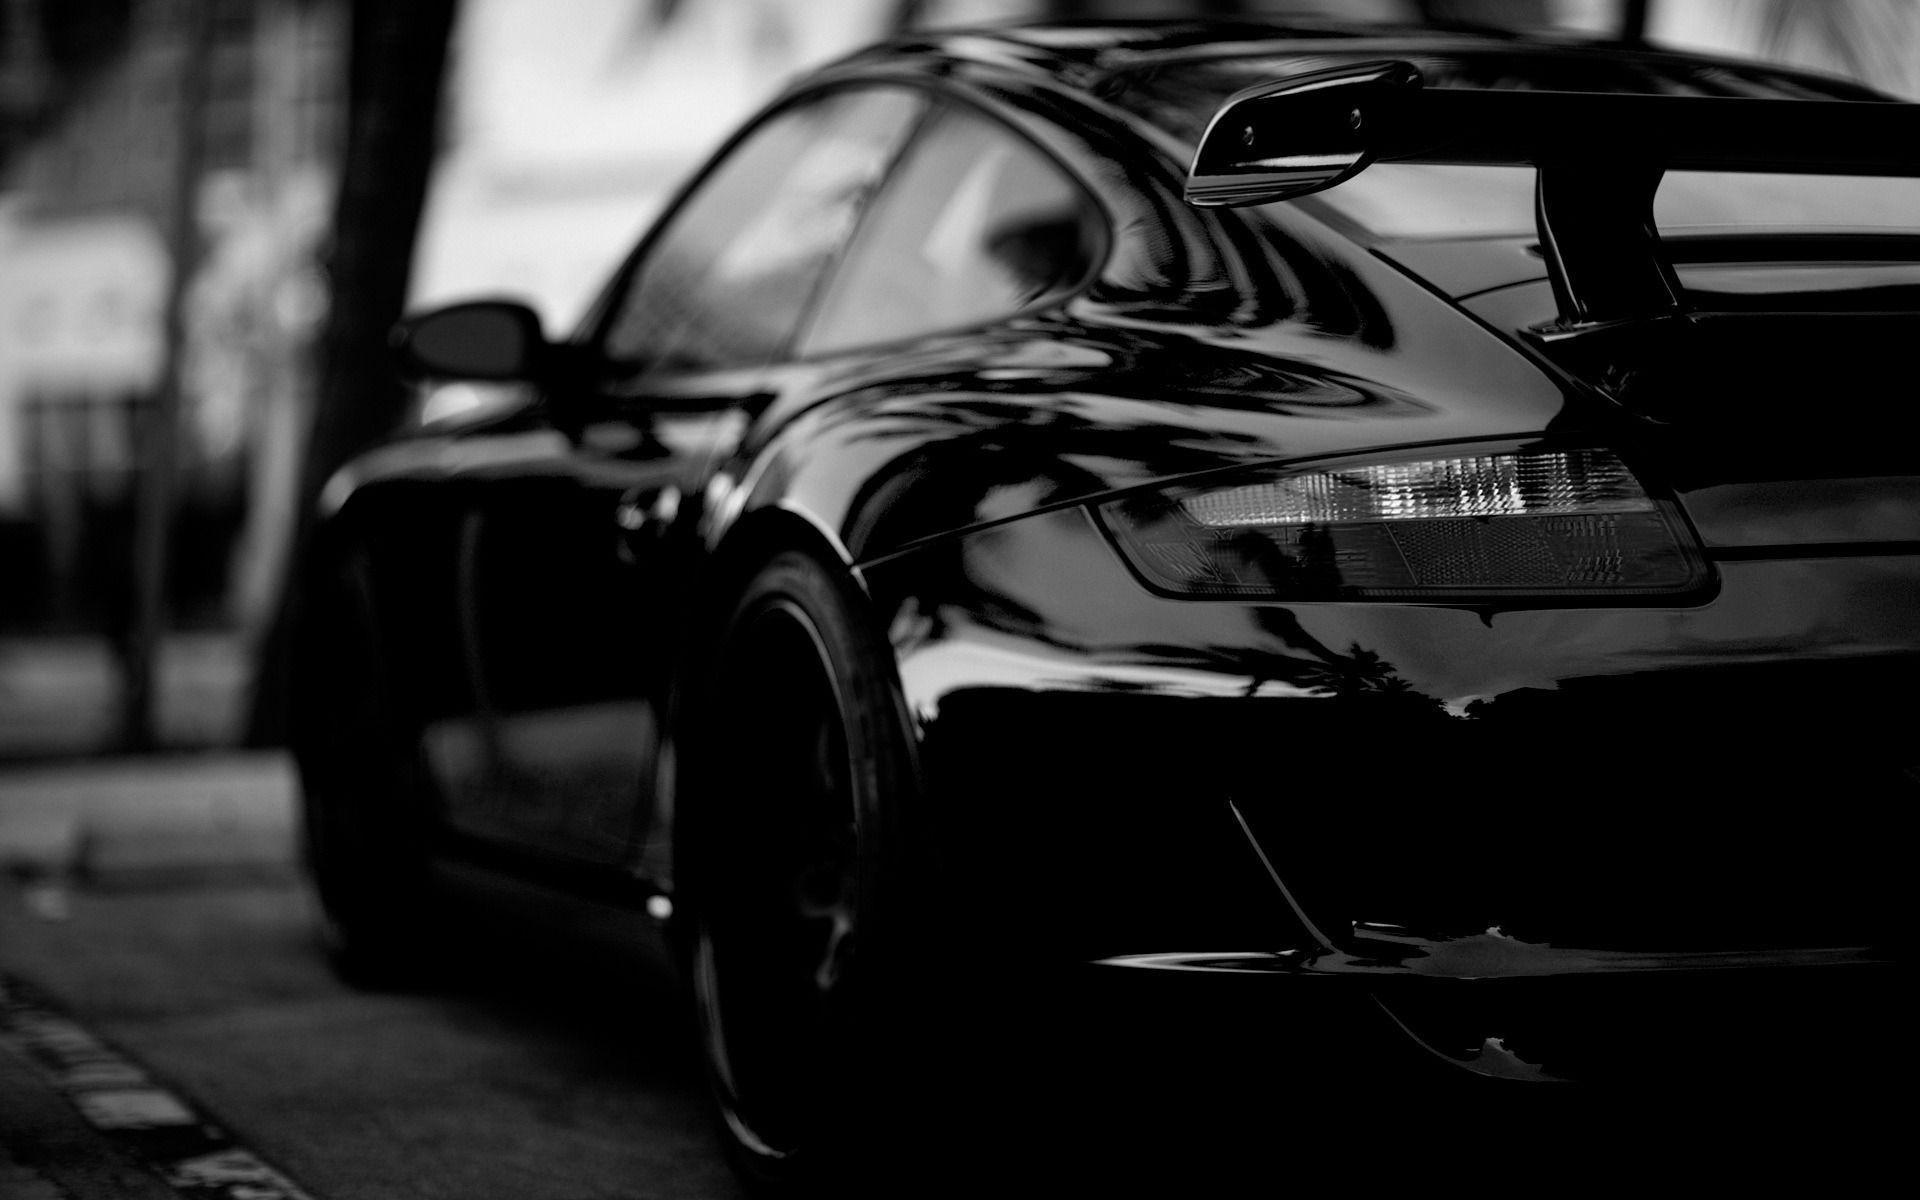 Black and White Car Wallpaper Free Black and White Car